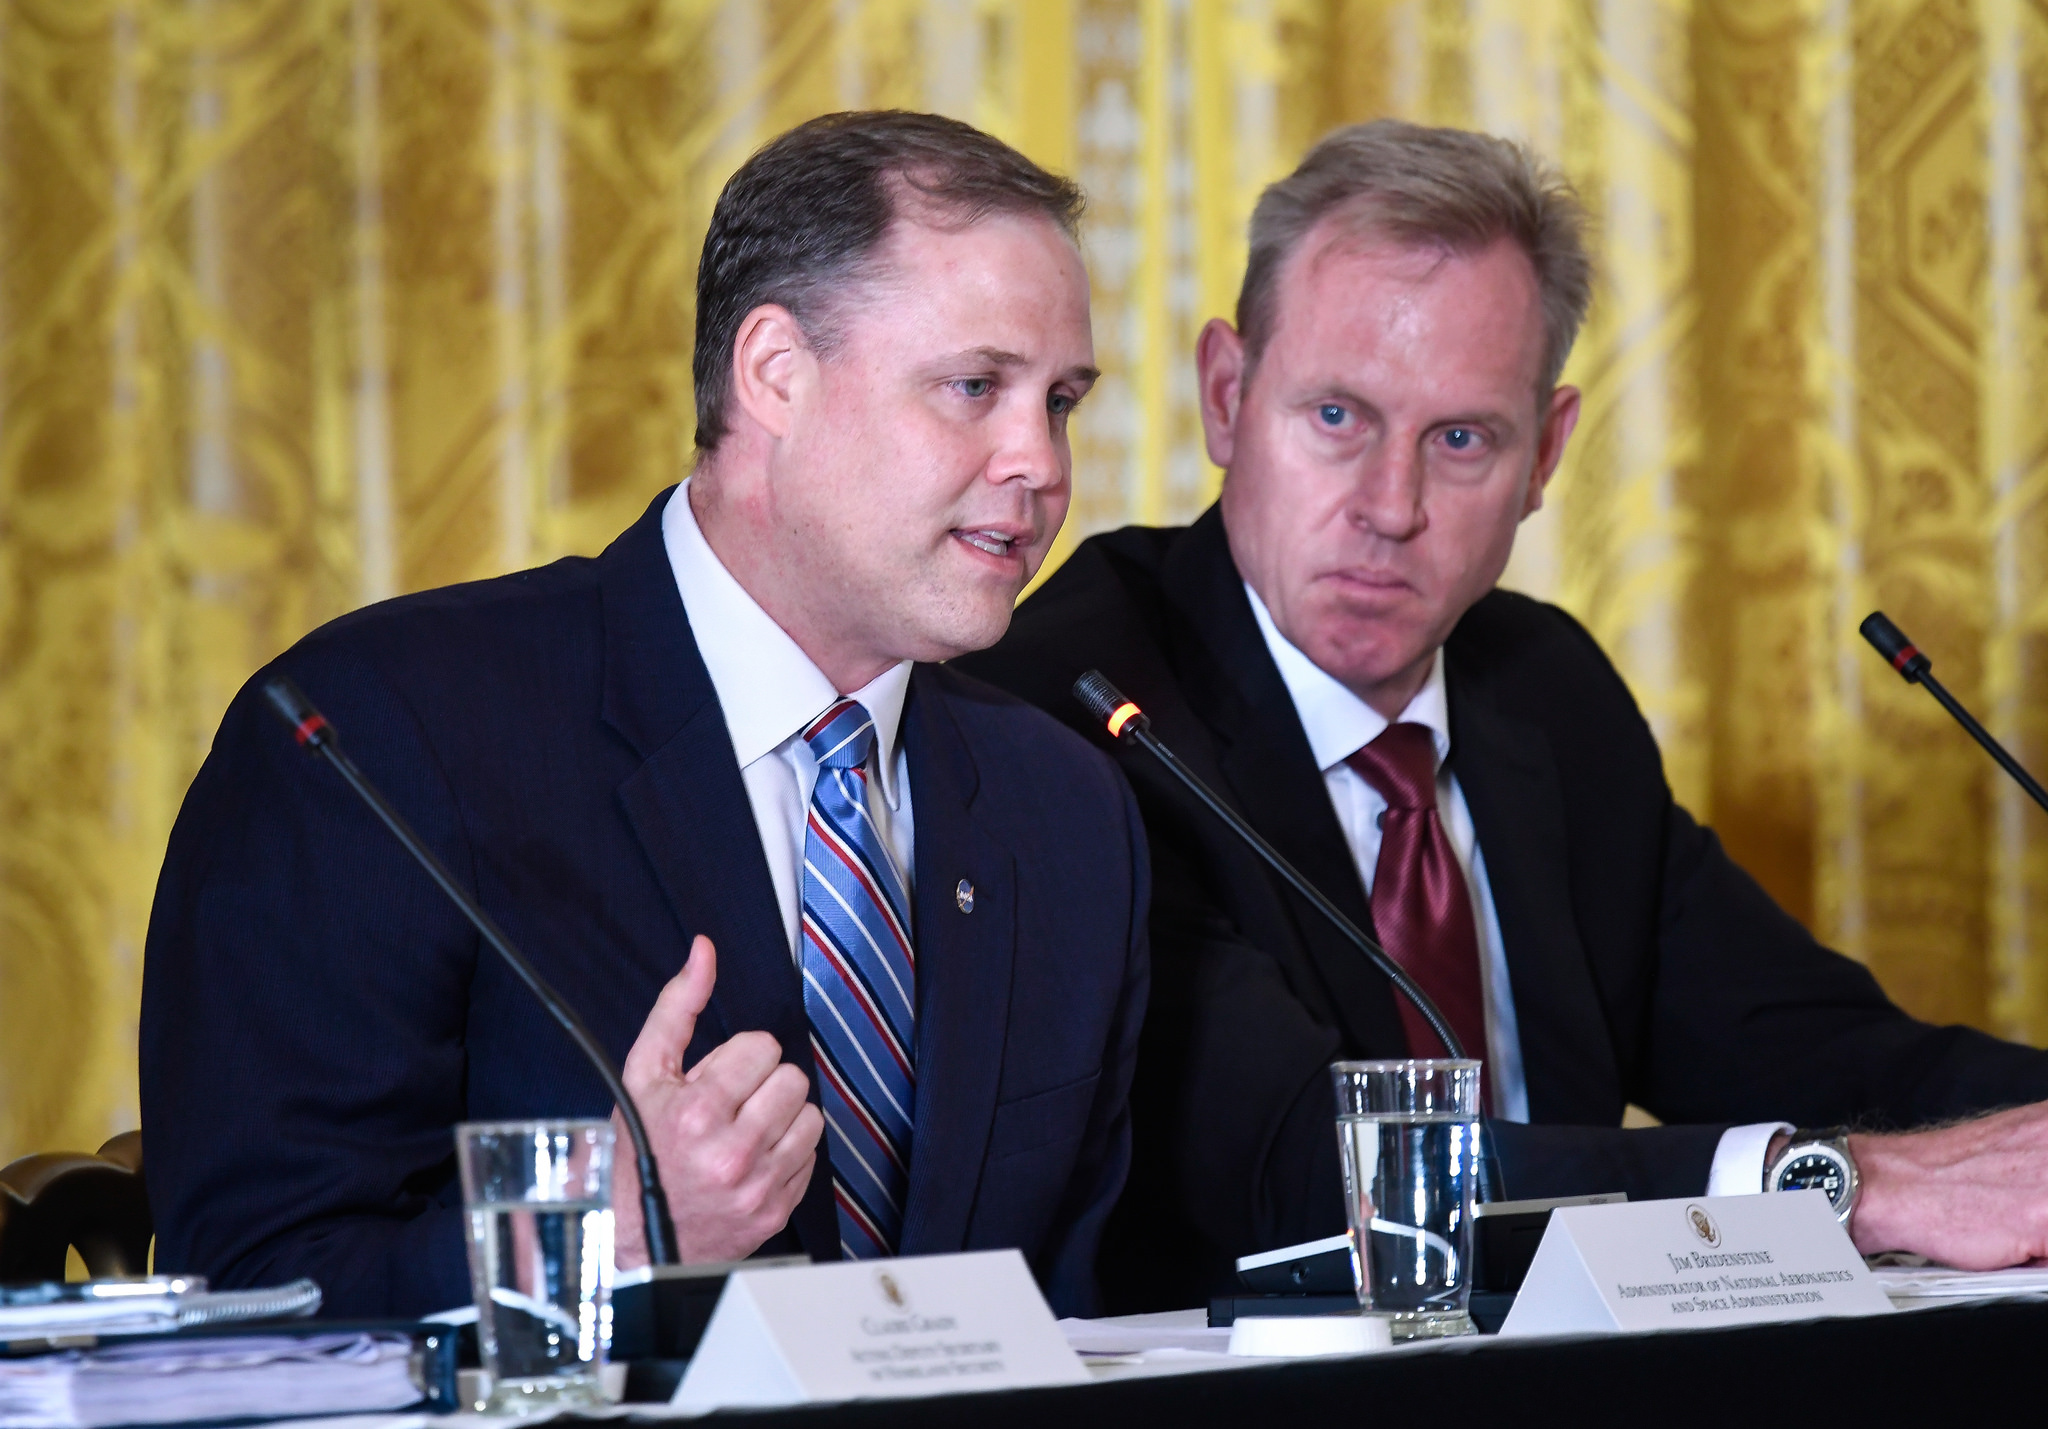 NASA Administrator Jim Bridenstine speaks during a meeting of the National Space Council in the East Room of the White House, Monday, June 18, 2018, in Washington. Chaired by the Vice President, the council's role is to advise the President regarding national space policy and strategy, and review the nation's long-range goals for space activities.<br />Credits: NASA/Bill Ingalls